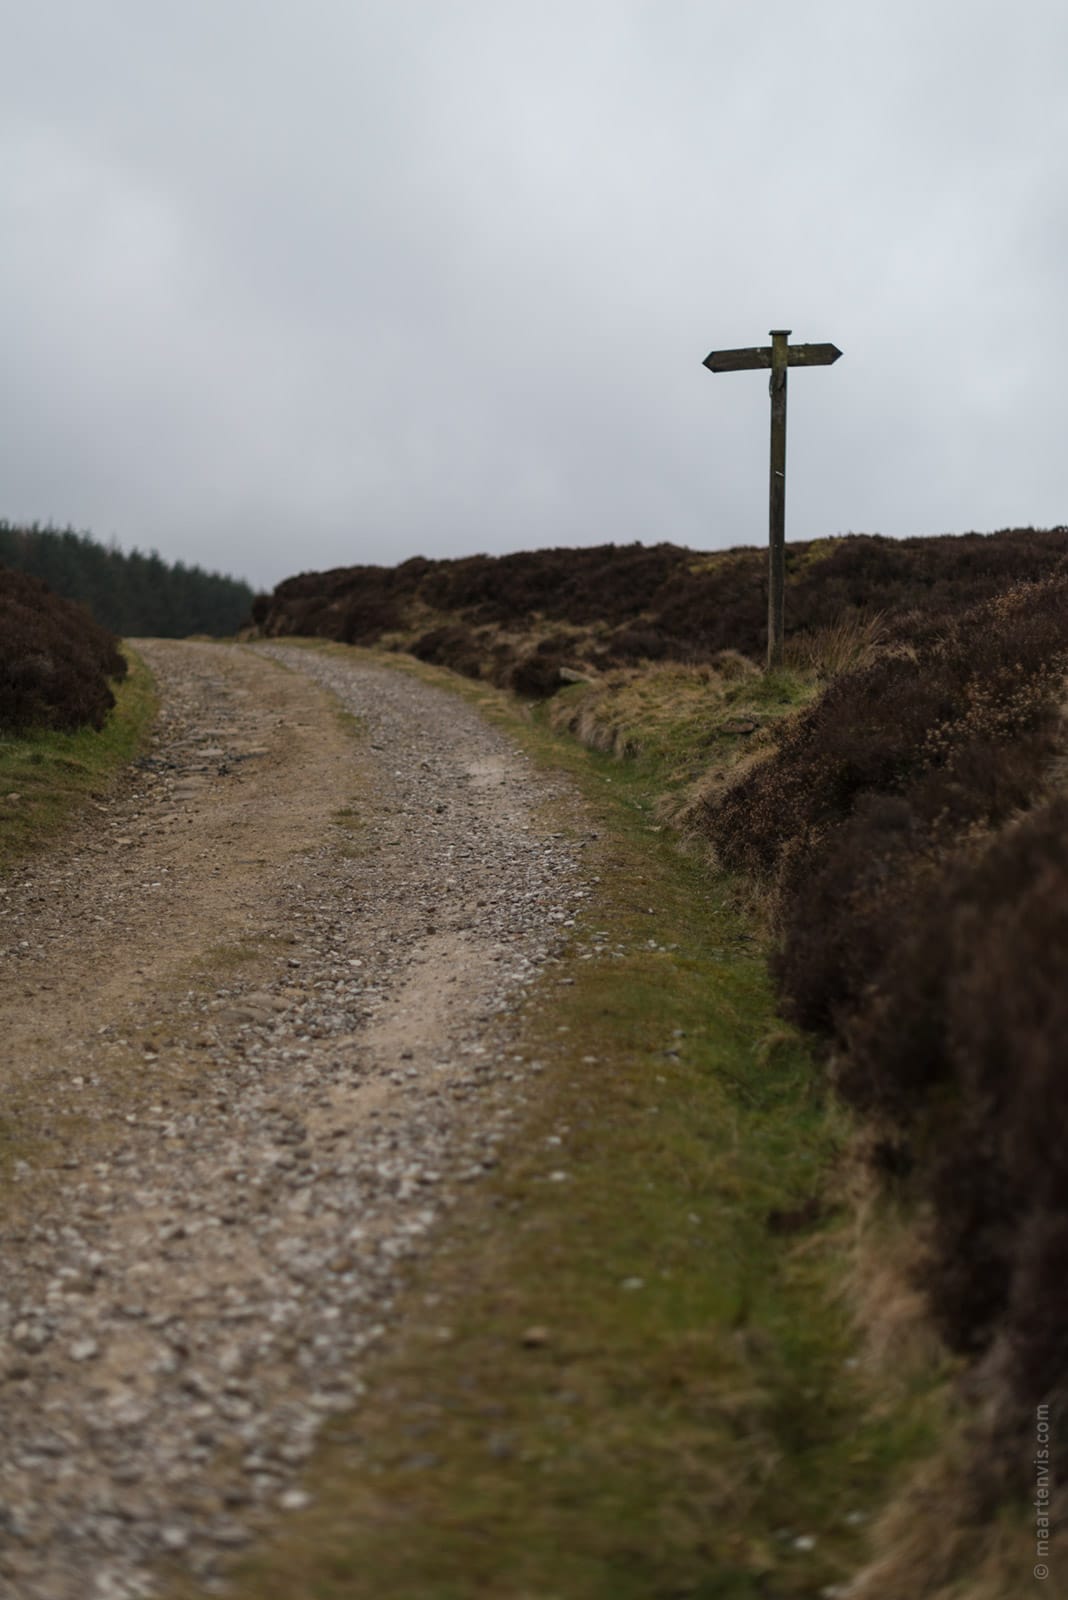 20160324 8084 - Hiking on the Moors with the Brontë sisters